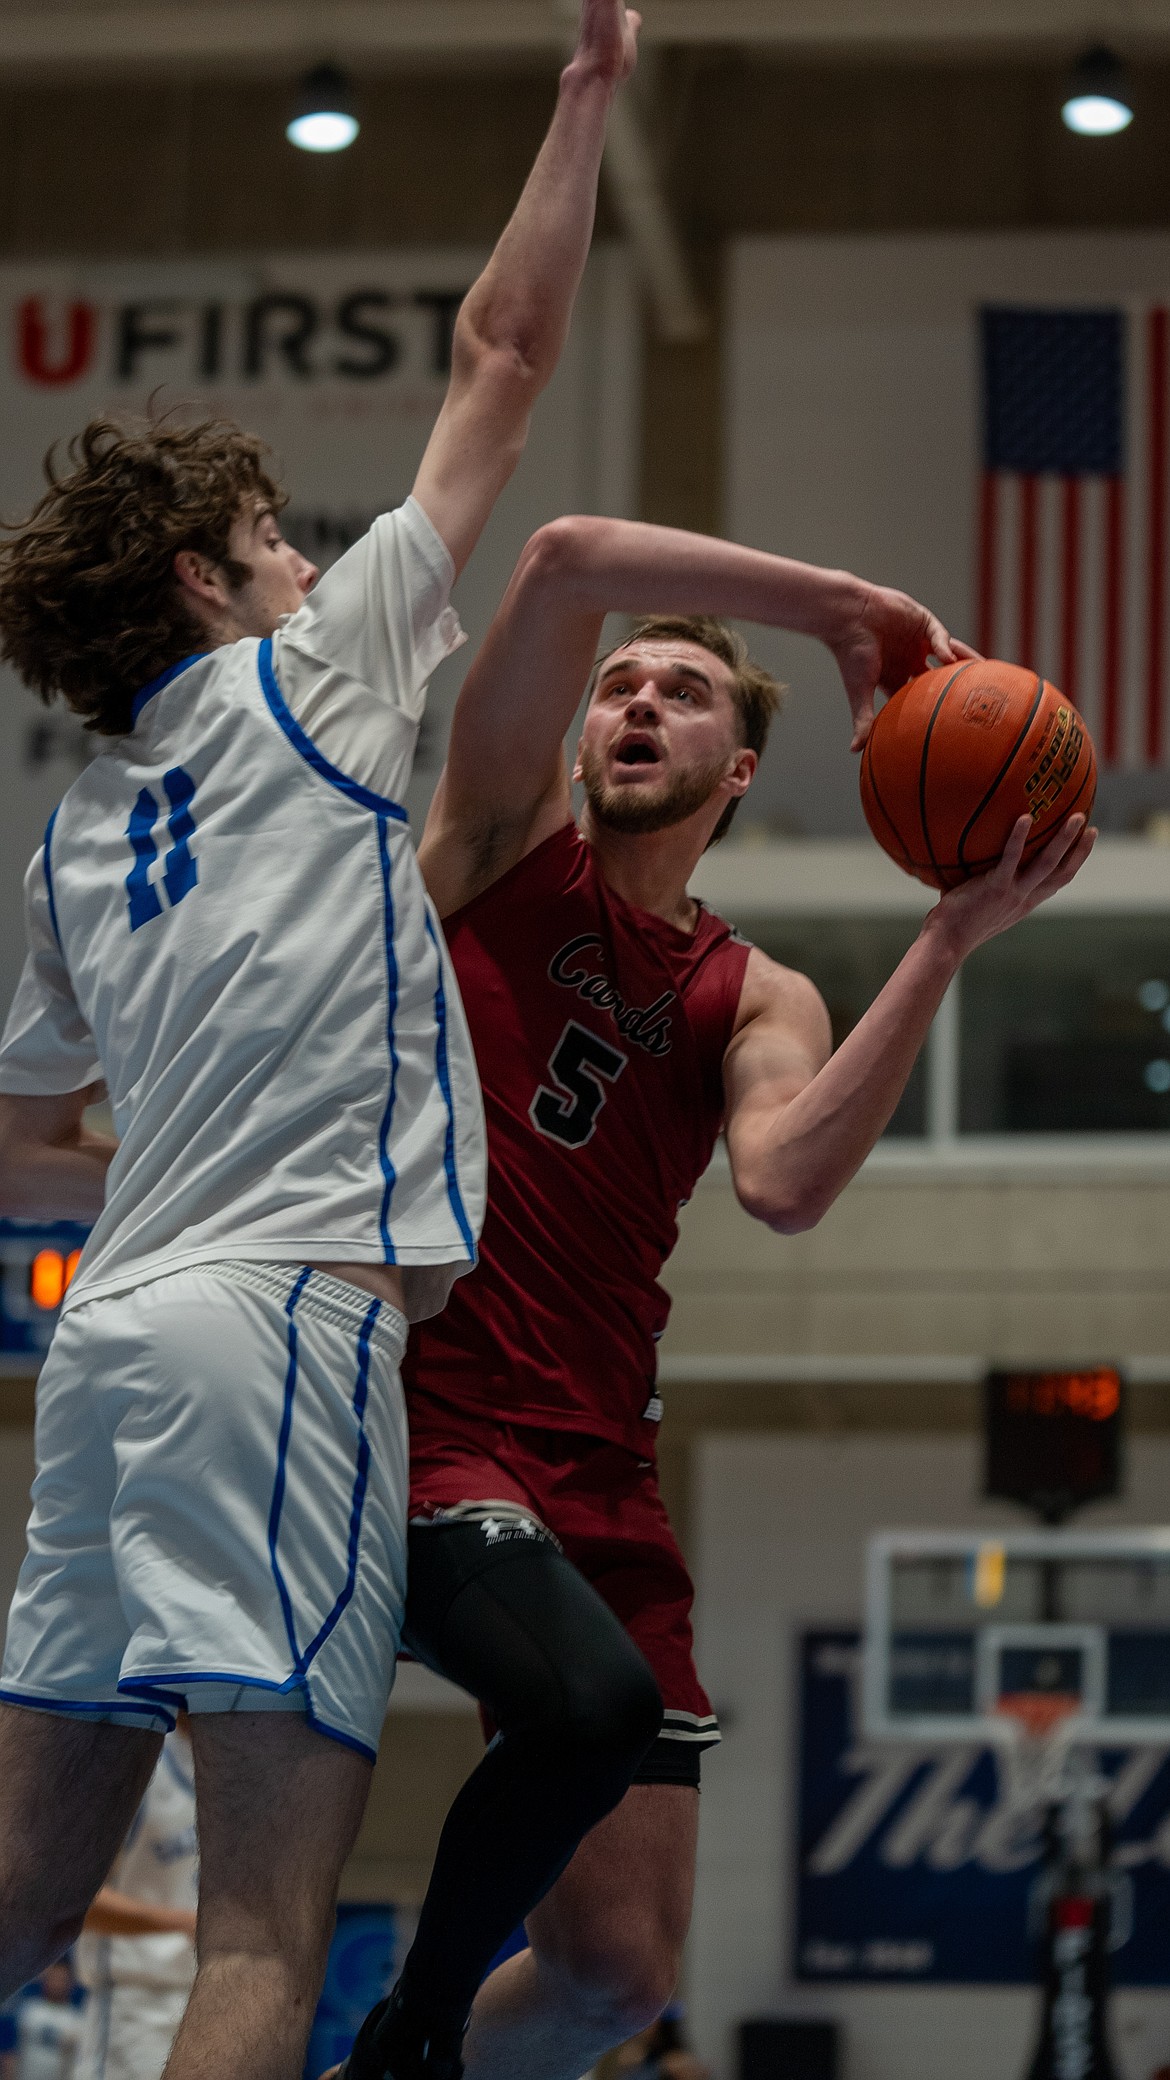 NIC ATHLETICS
North Idaho sophomore forward Kyle Karstetter attempts to get around Salt Lake's Coen Collier in the second half of Friday's Region 18 tournament semifinal at Bruin Arena in Taylorsville, Utah.